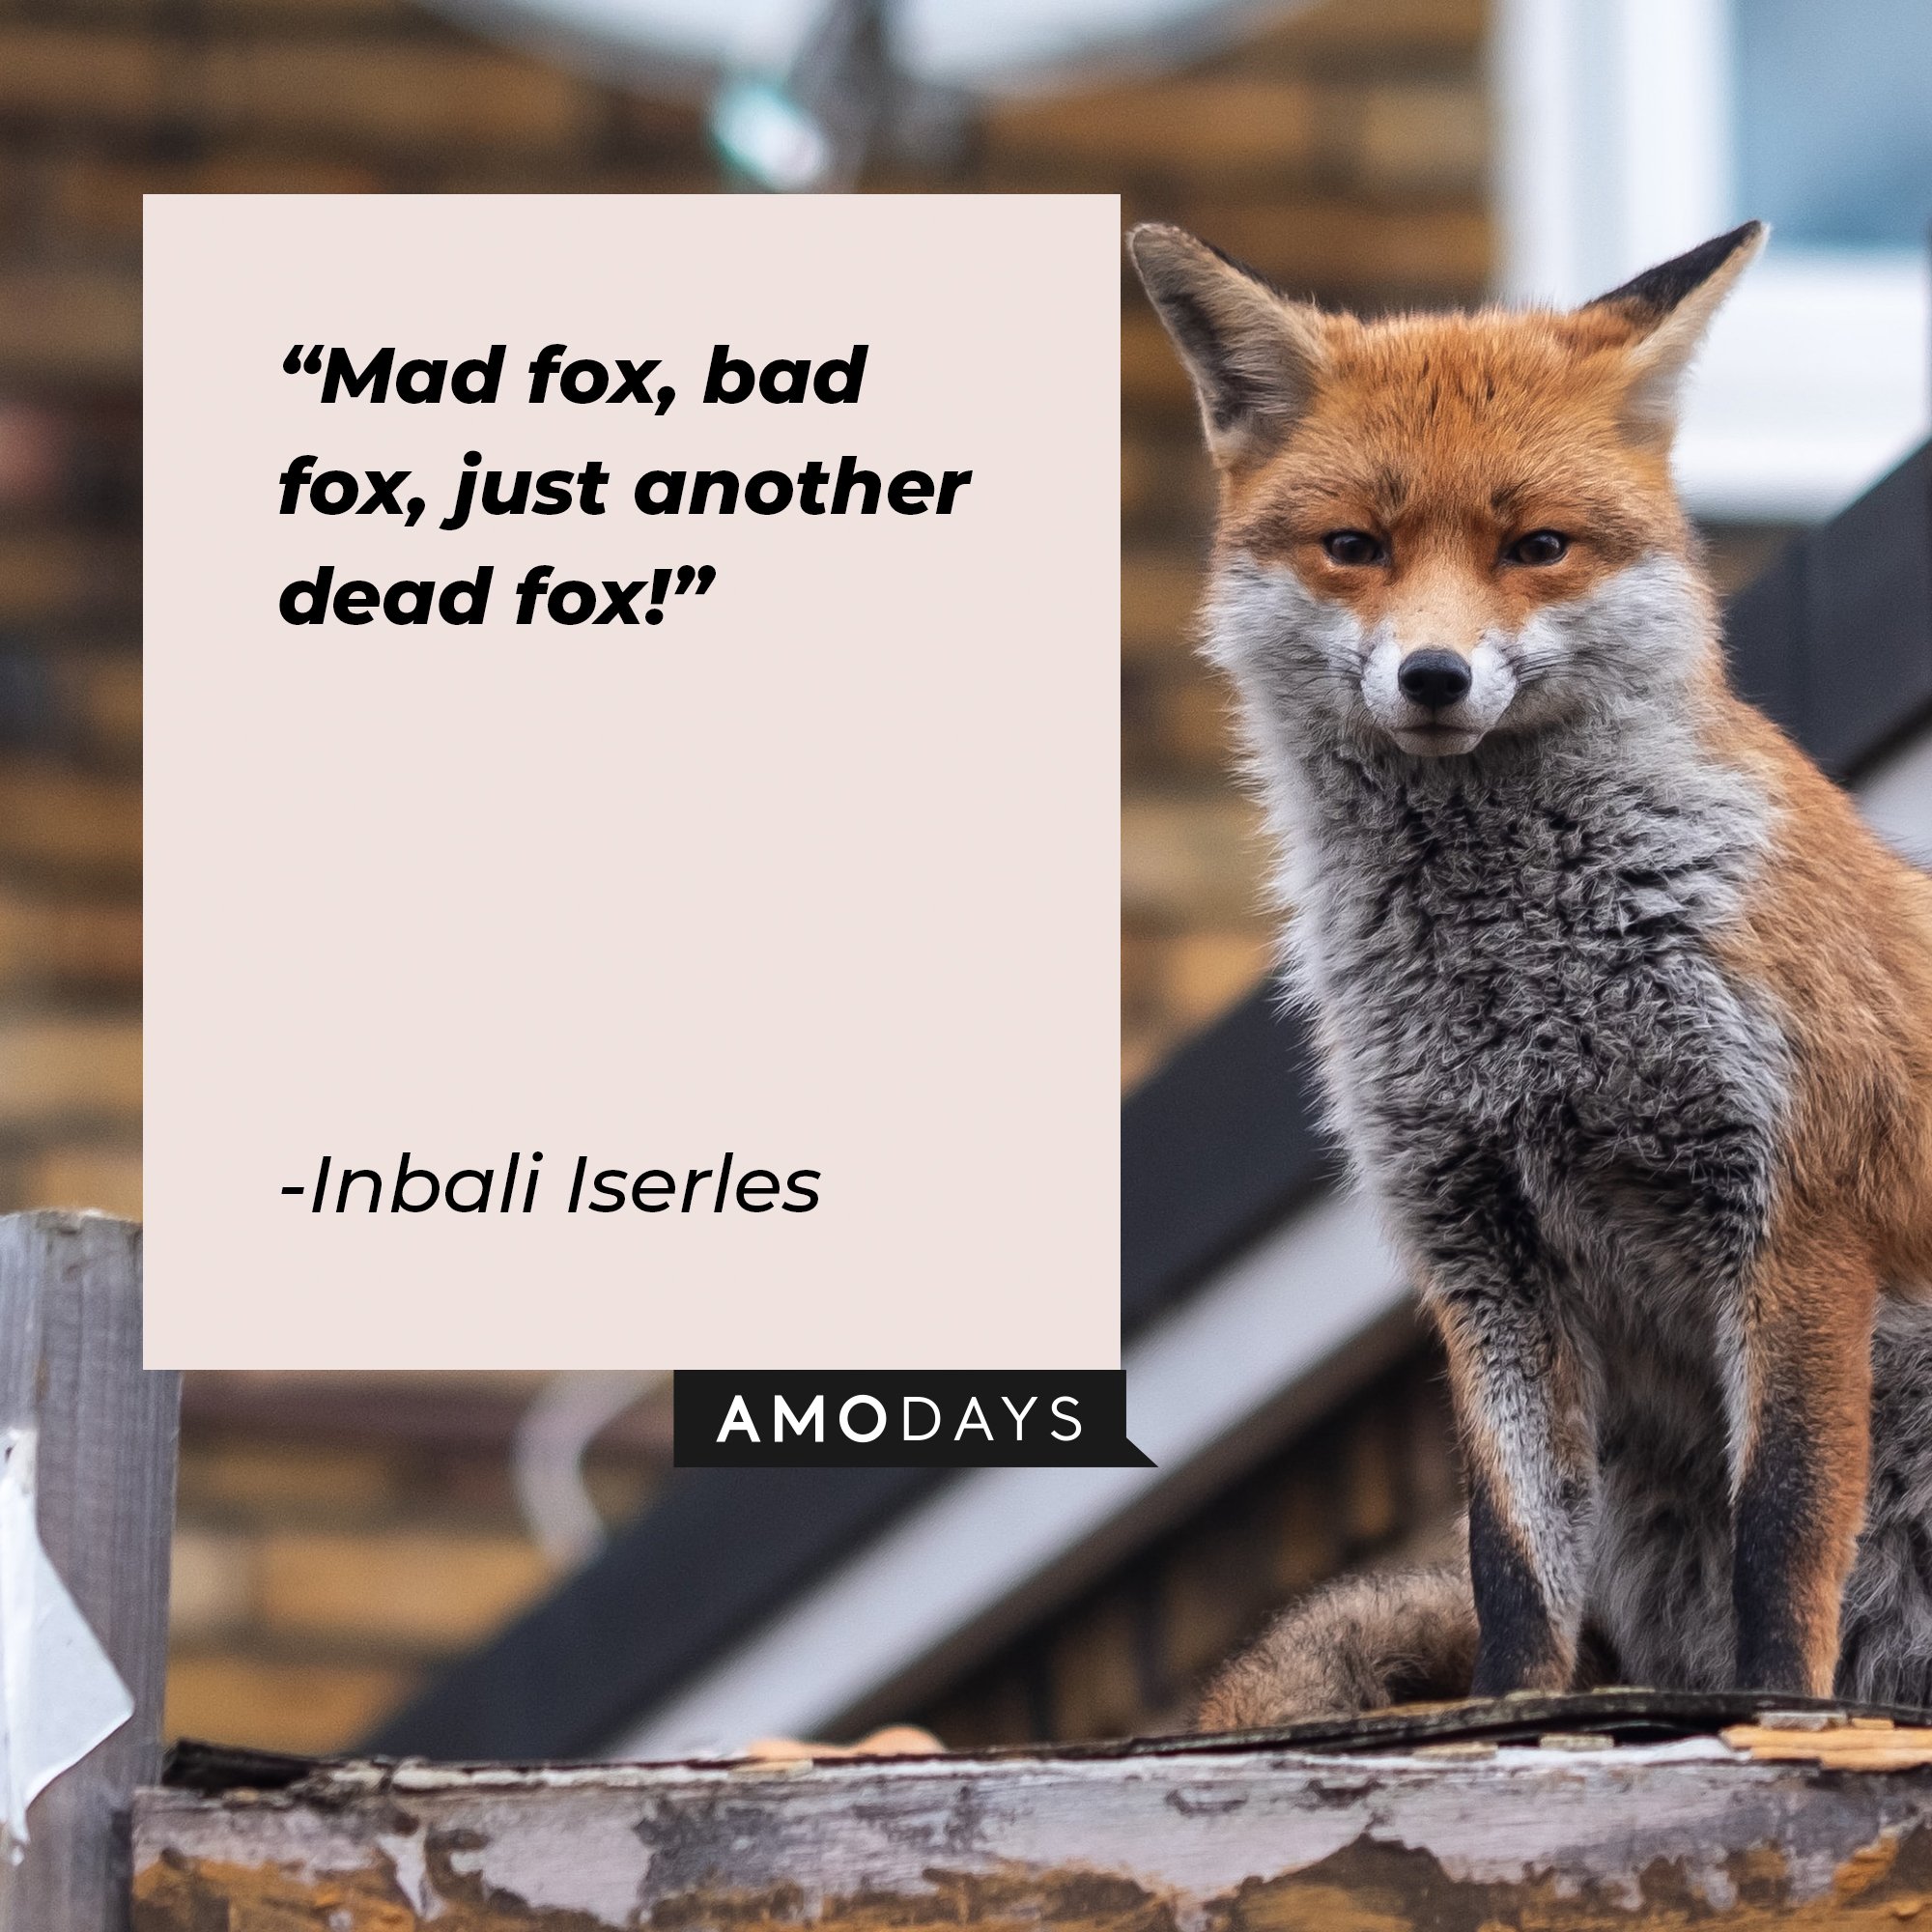 Inbali Iserles’ quote: "Mad fox, bad fox, just another dead fox!" | Image: AmoDays